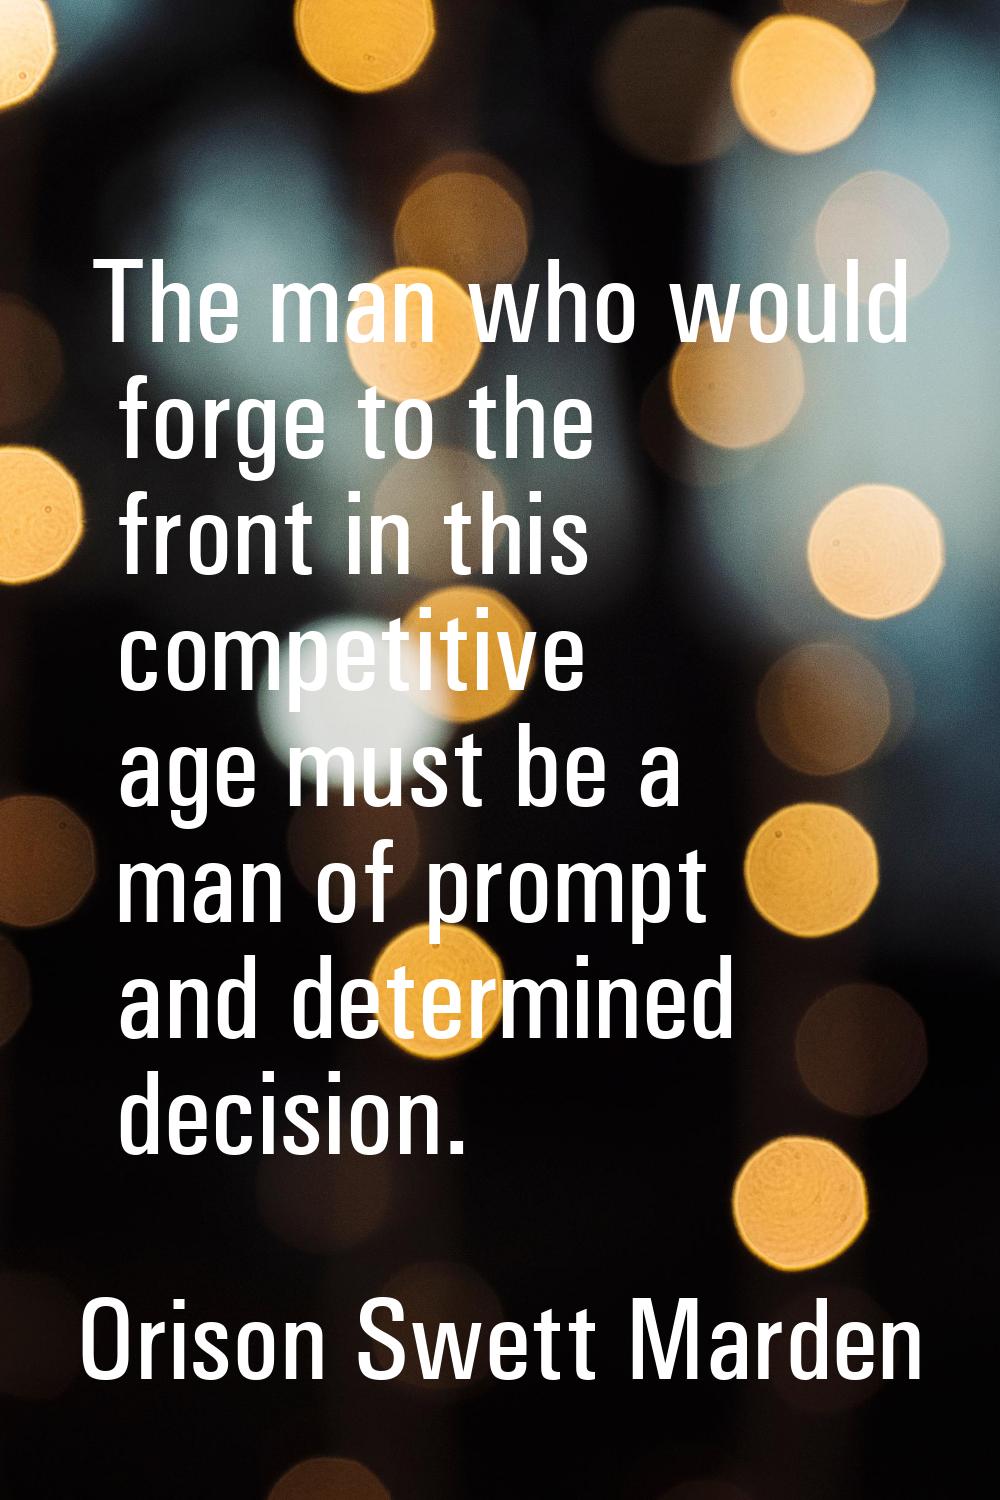 The man who would forge to the front in this competitive age must be a man of prompt and determined